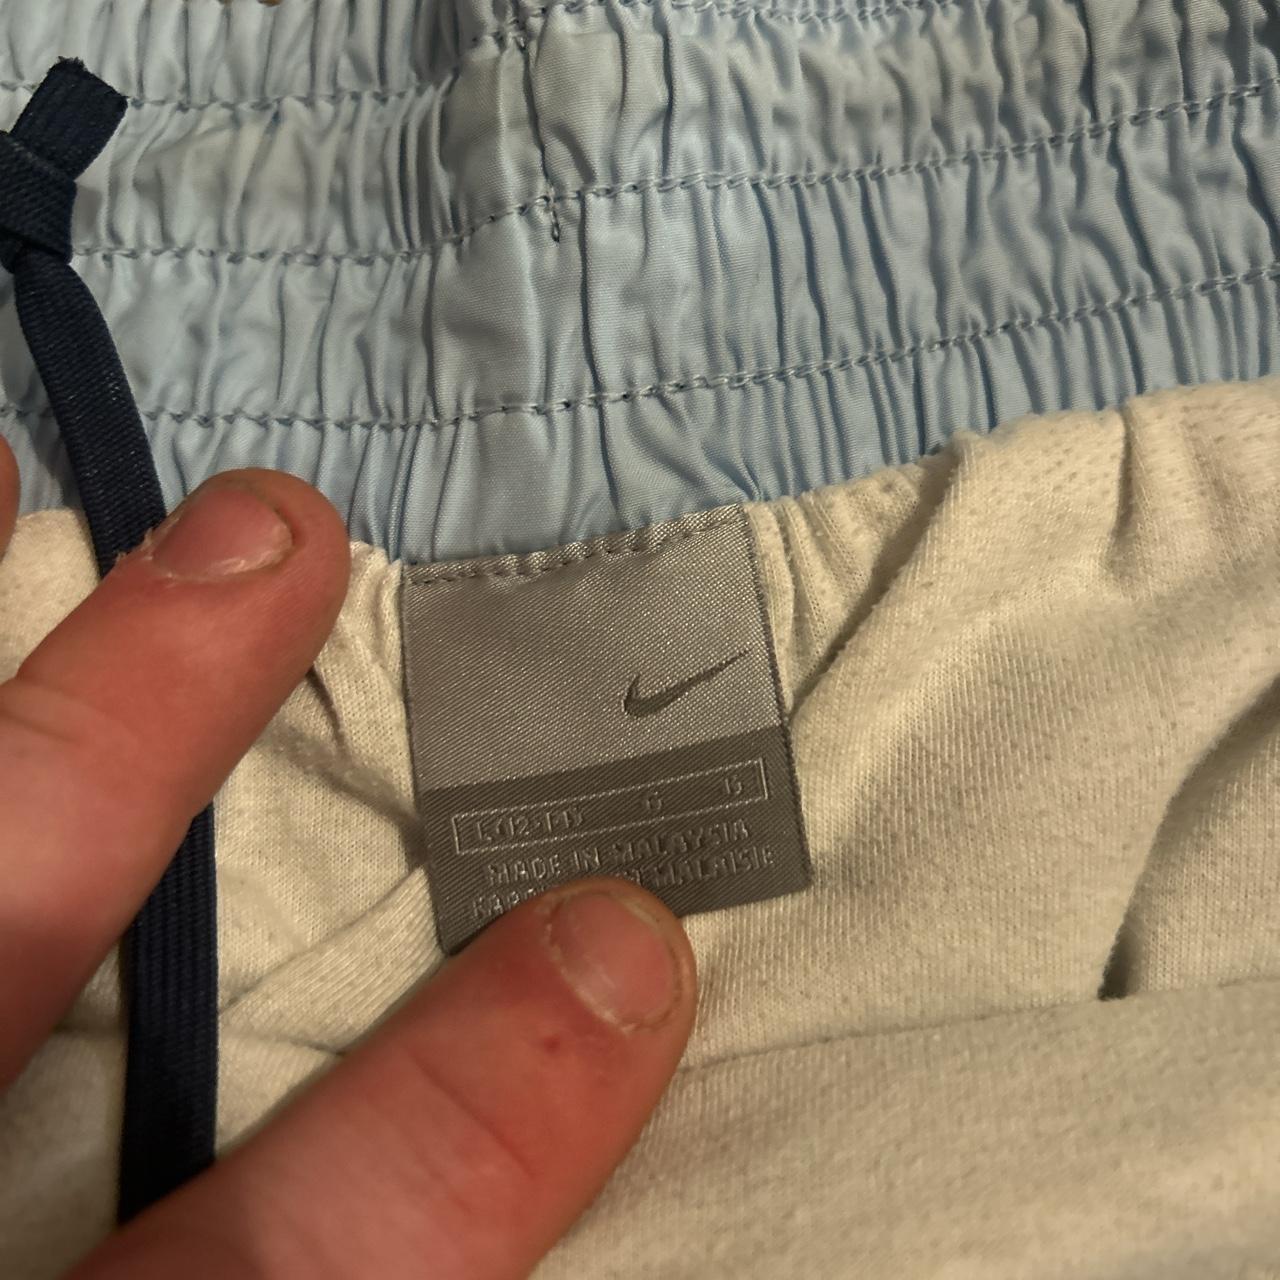 Nike Men's Blue and White Joggers-tracksuits (3)